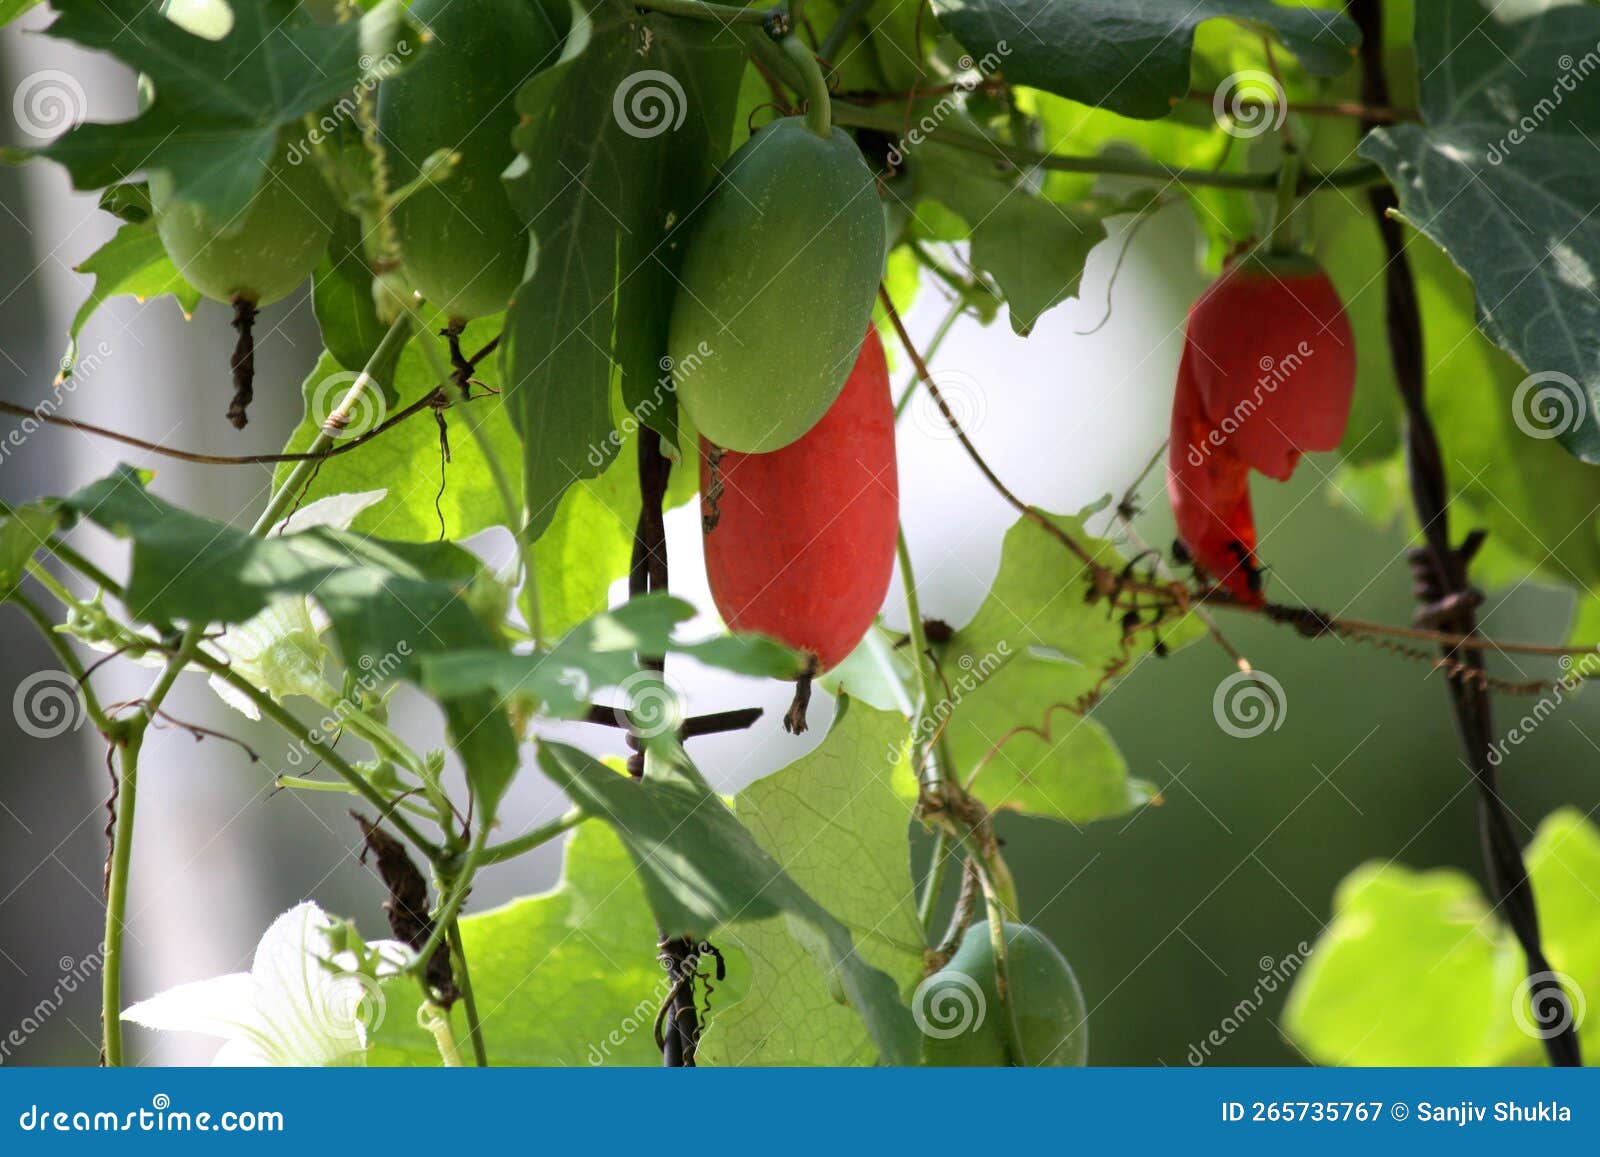 Ivy Gourd Coccinia Grandis Vine With Ripe And Unripe Fruits Pix